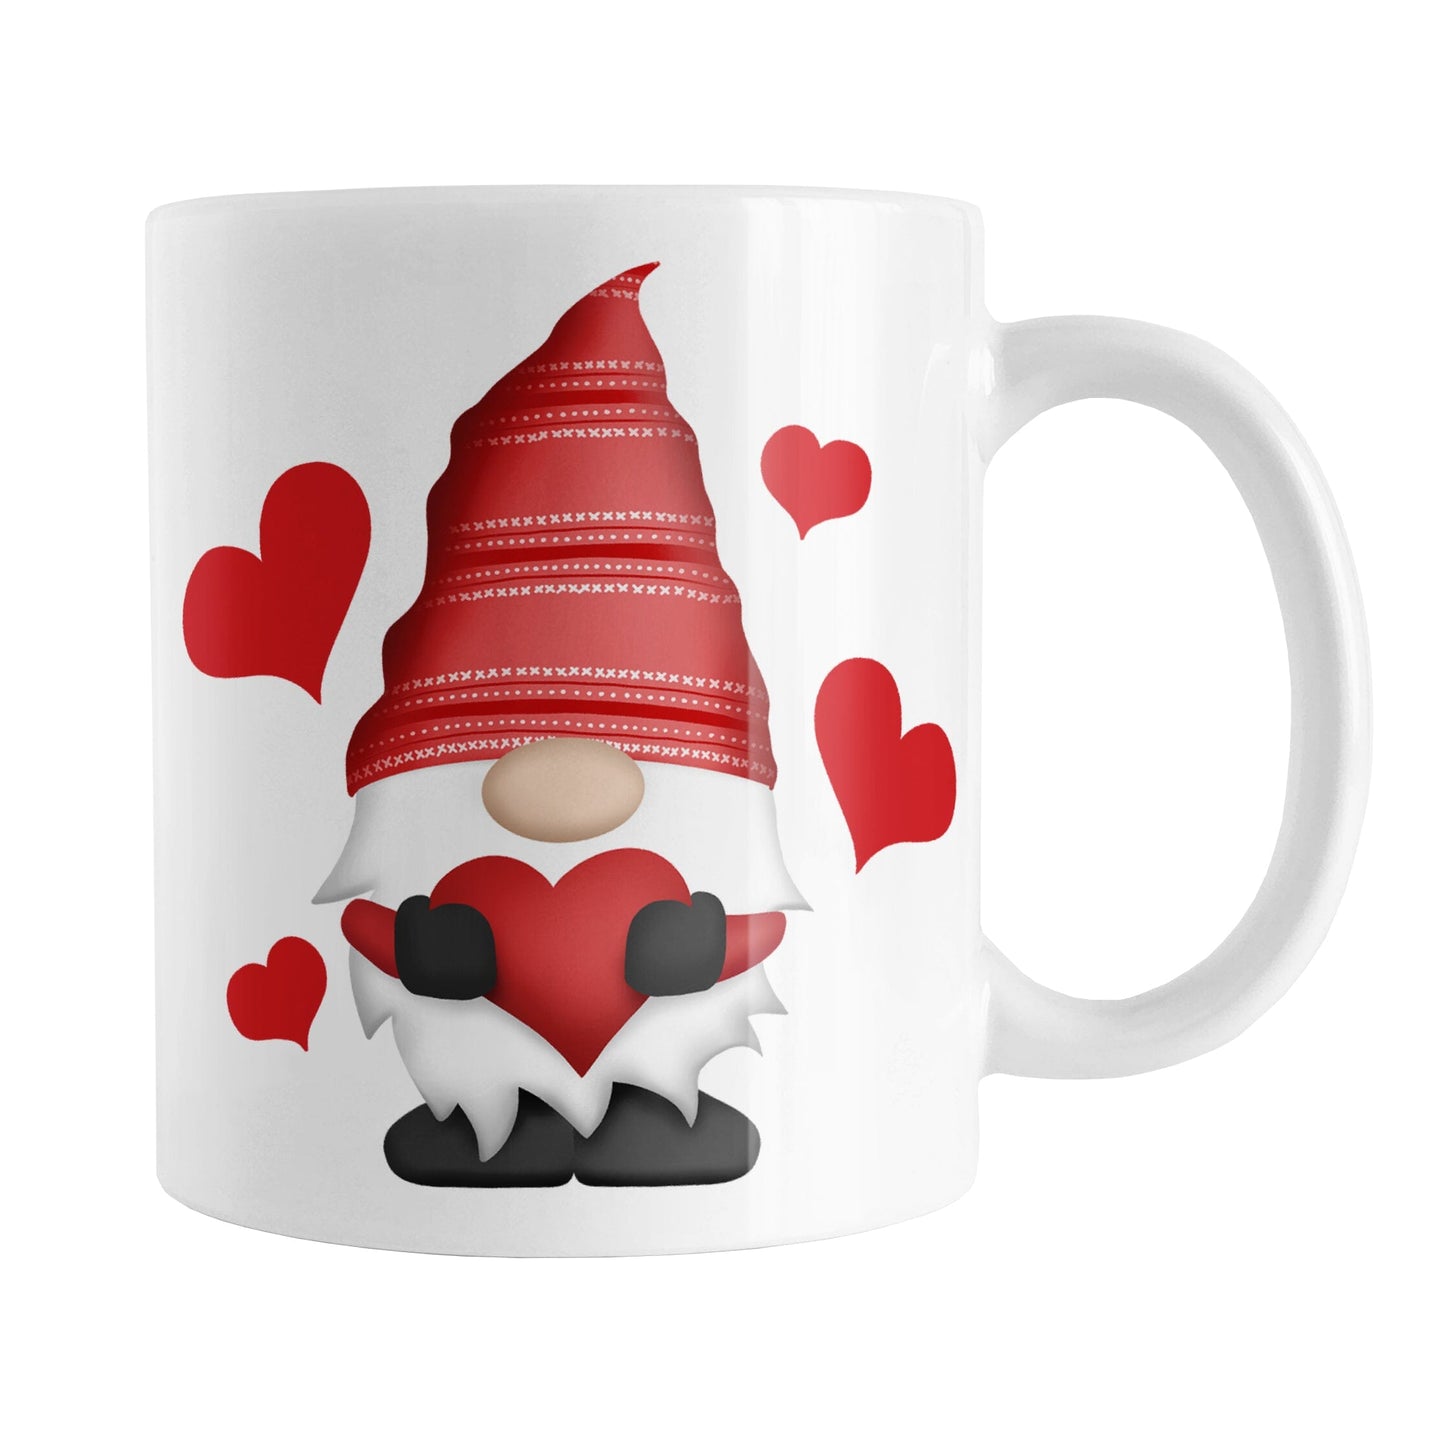 Red Heart Gnome Mug (11oz) at Amy's Coffee Mugs. A ceramic coffee mug designed with an adorable gnome wearing a festive red hat and holding a large red heart. Around the cute gnome are bold red hearts. This loving gnome illustration is on both sides of the mug.